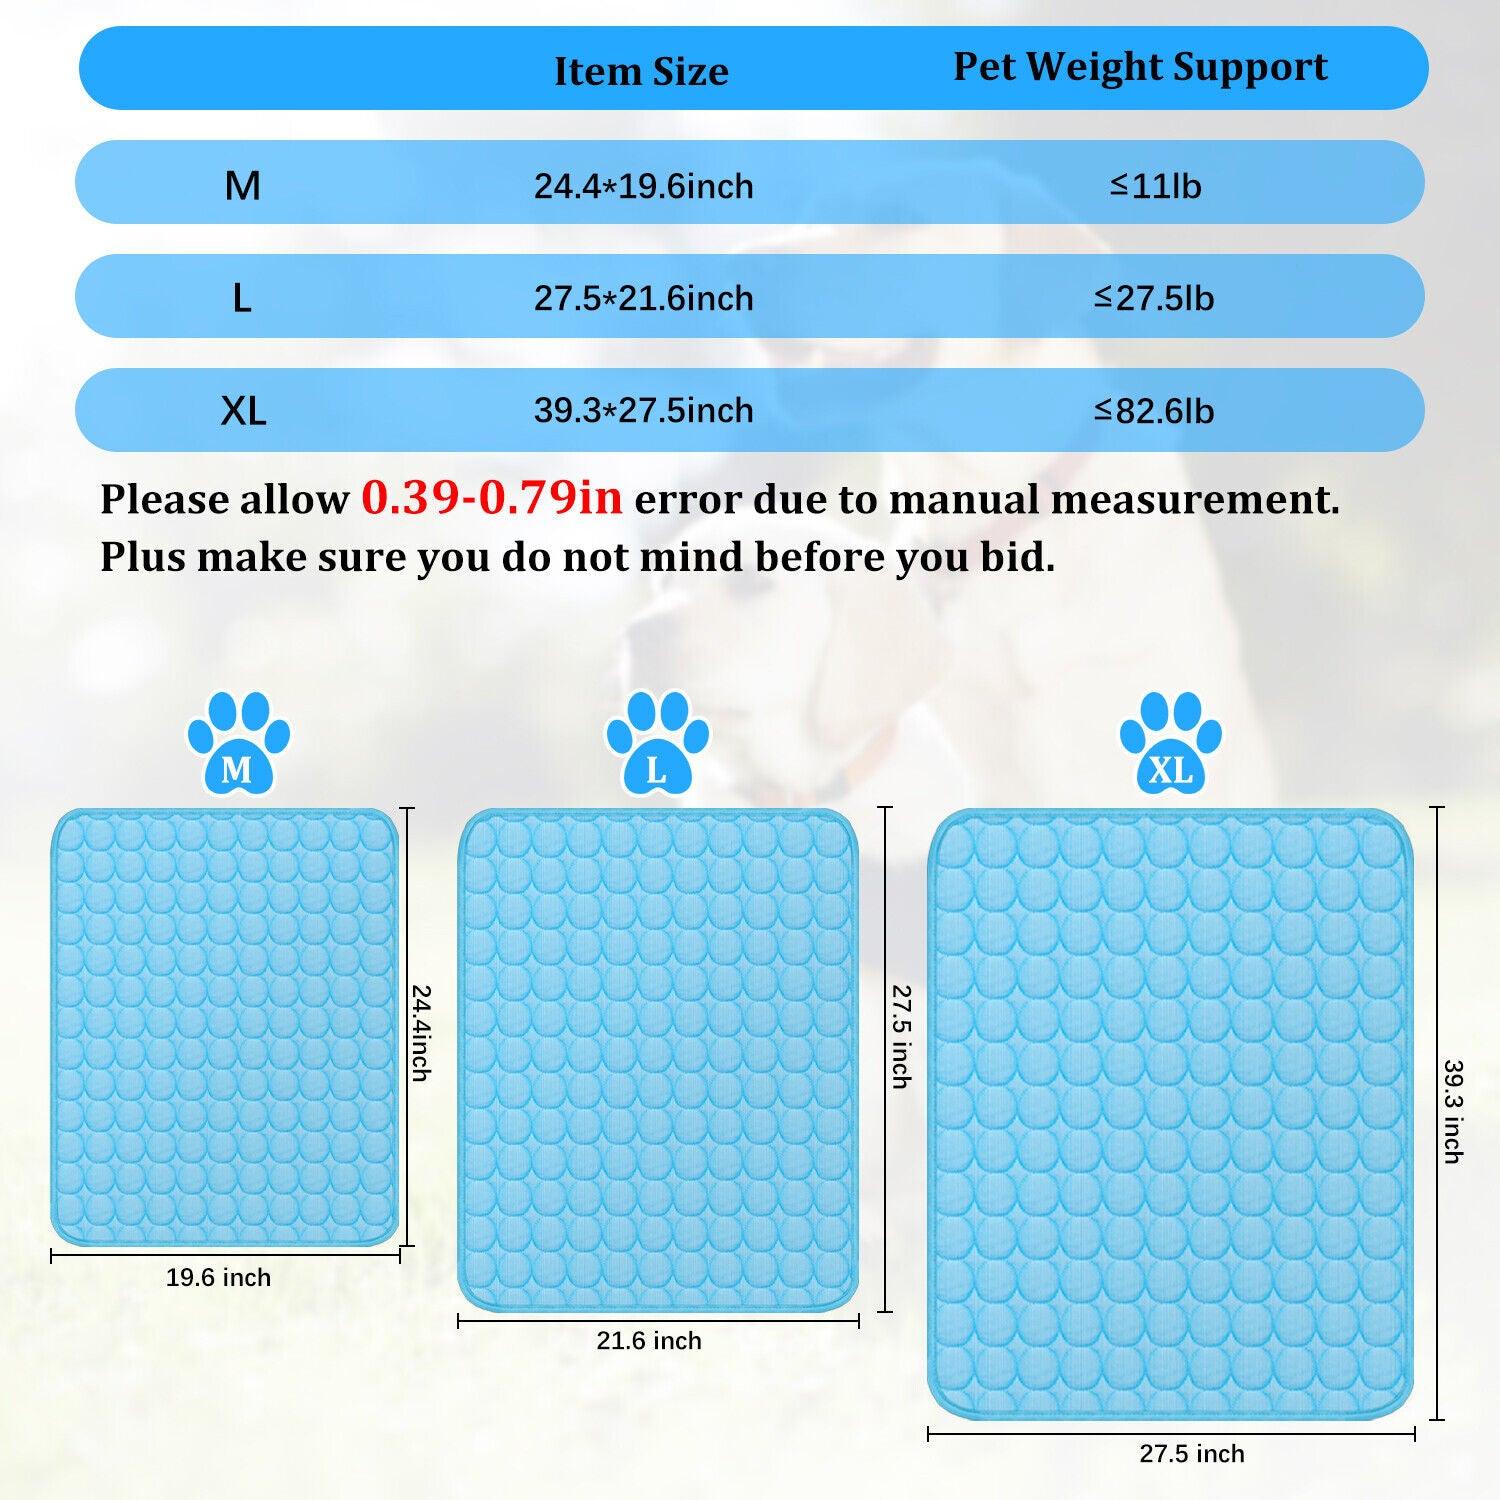 Pet Cooling Mat Cool Pad Cushion Dog Cat Puppy Blanket For Summer Sleeping Bed Dog Cooling Bed Pet Cooling Mat - Dog Hugs Cat